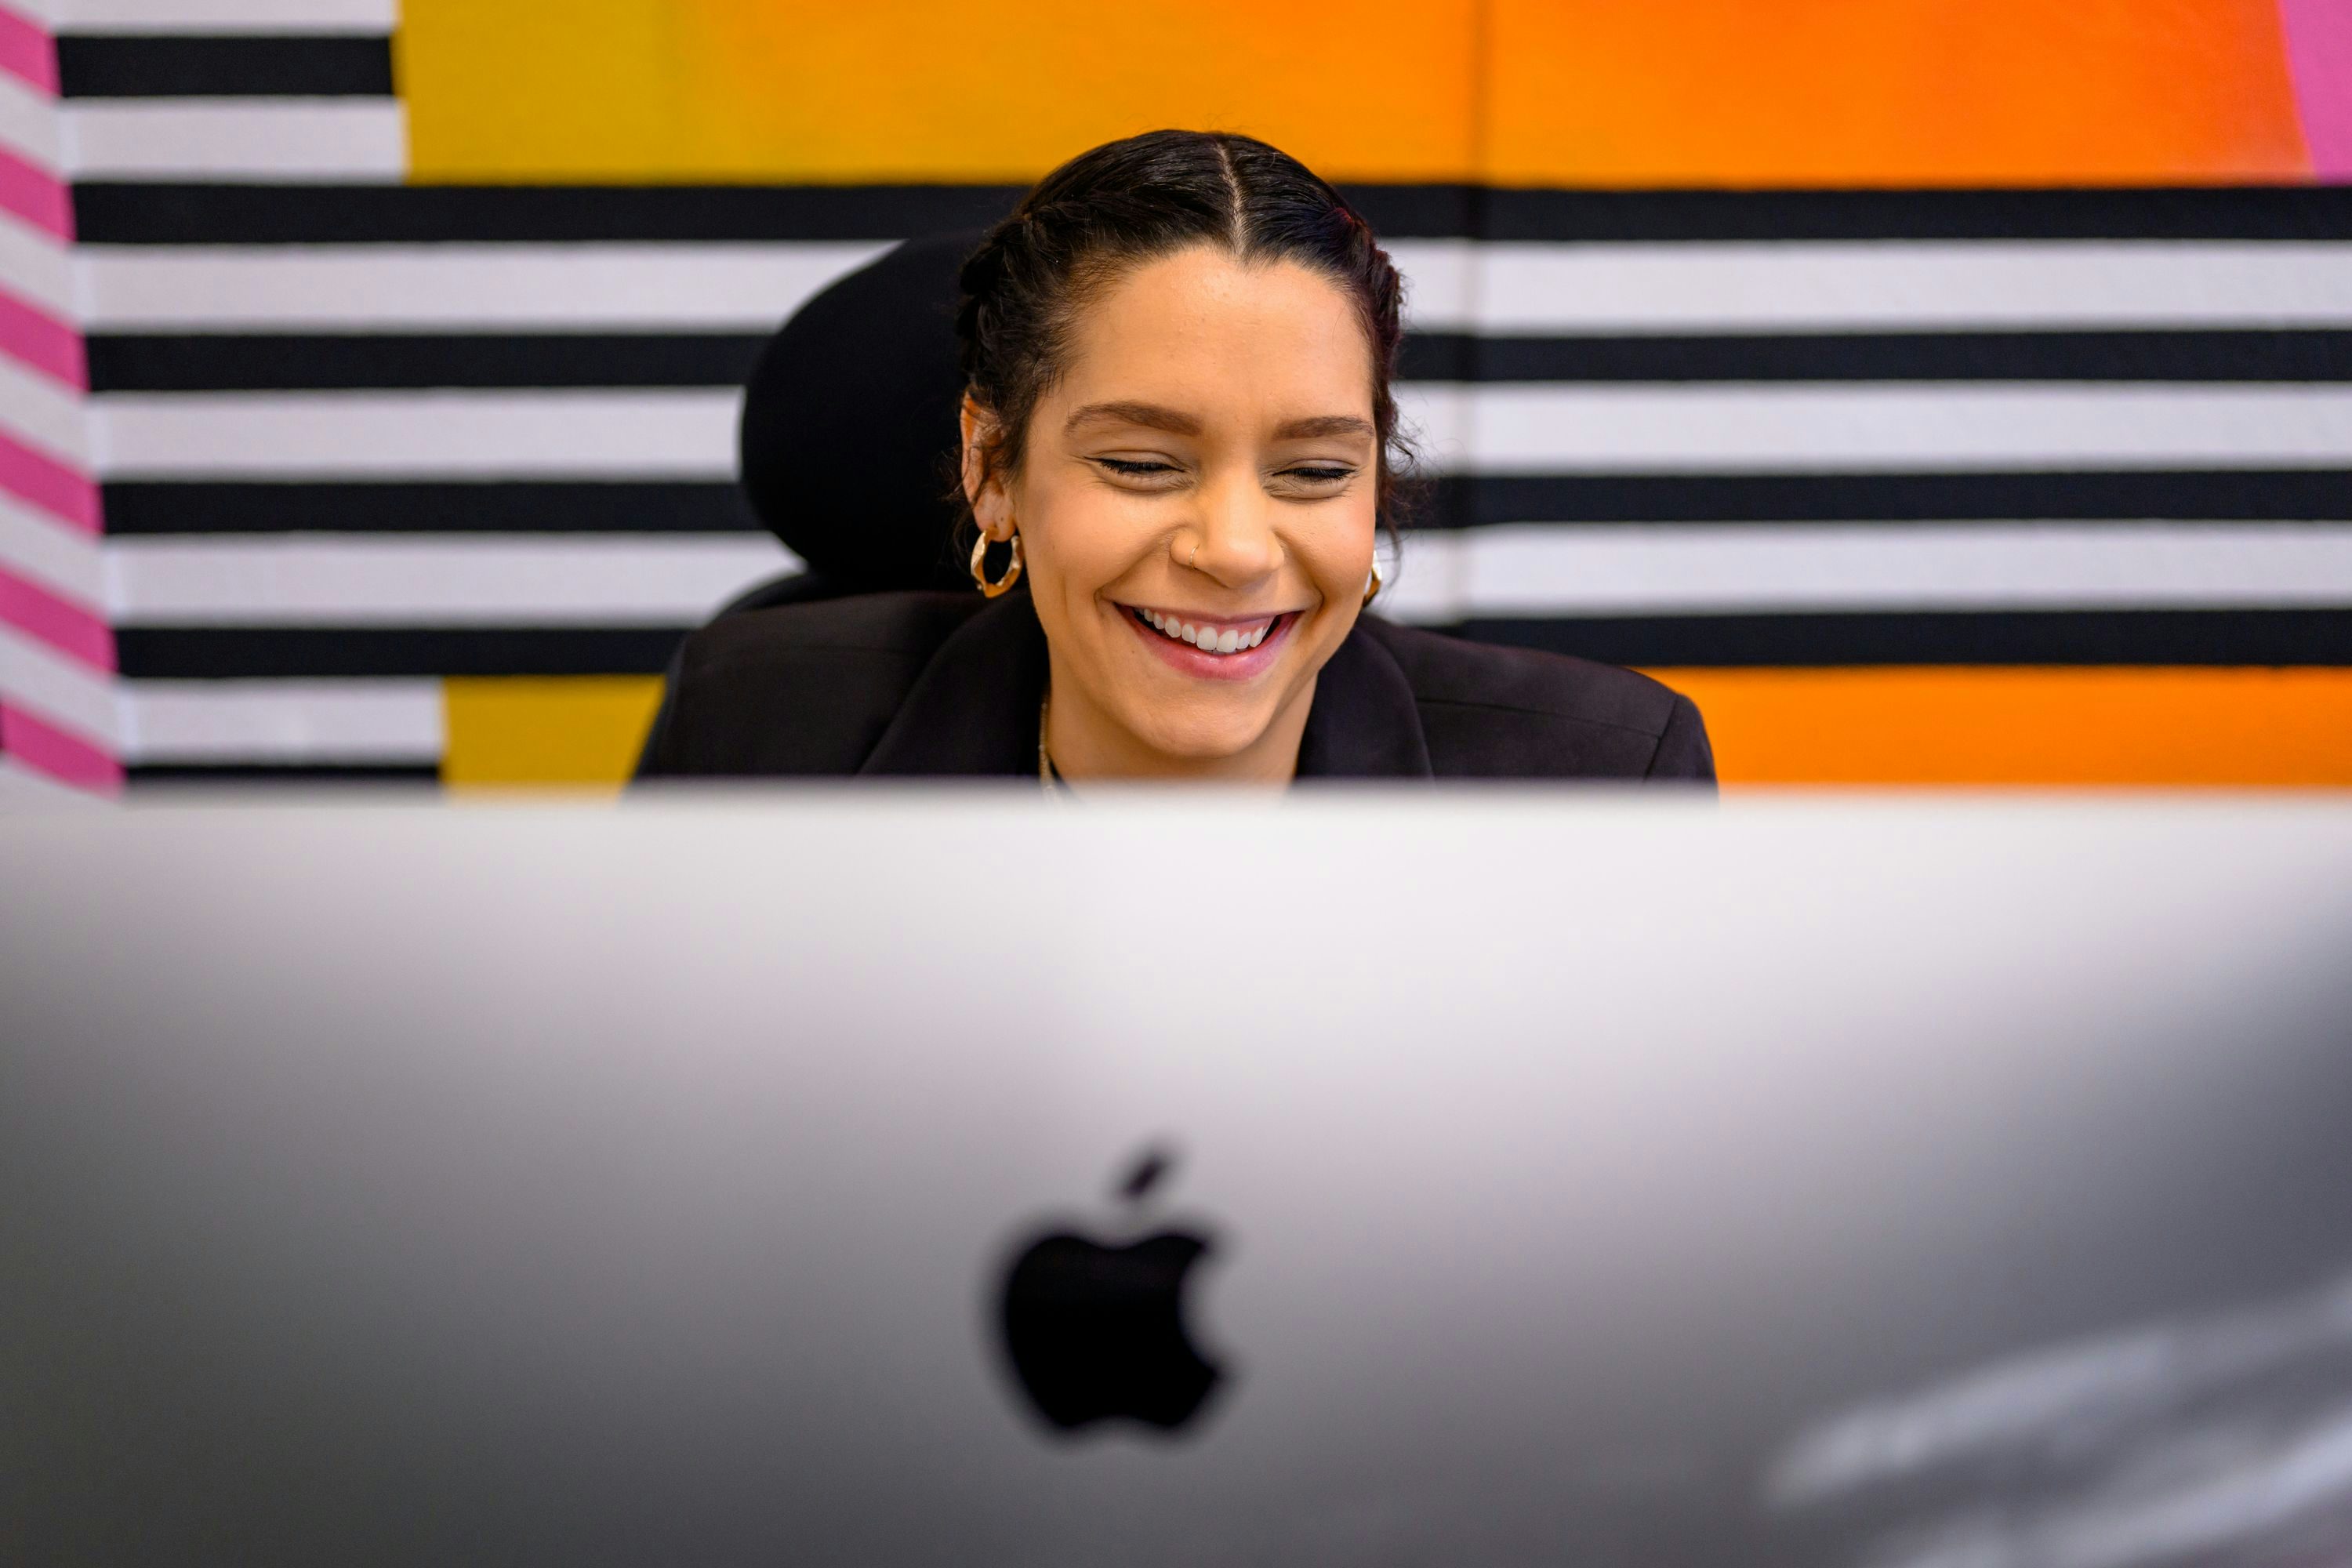 A professional woman wearing a black blazer is smiling and working at her desk. The foreground shows the back of an Apple computer monitor, and the background features a colourful striped wall with yellow, orange, black and white stripes.